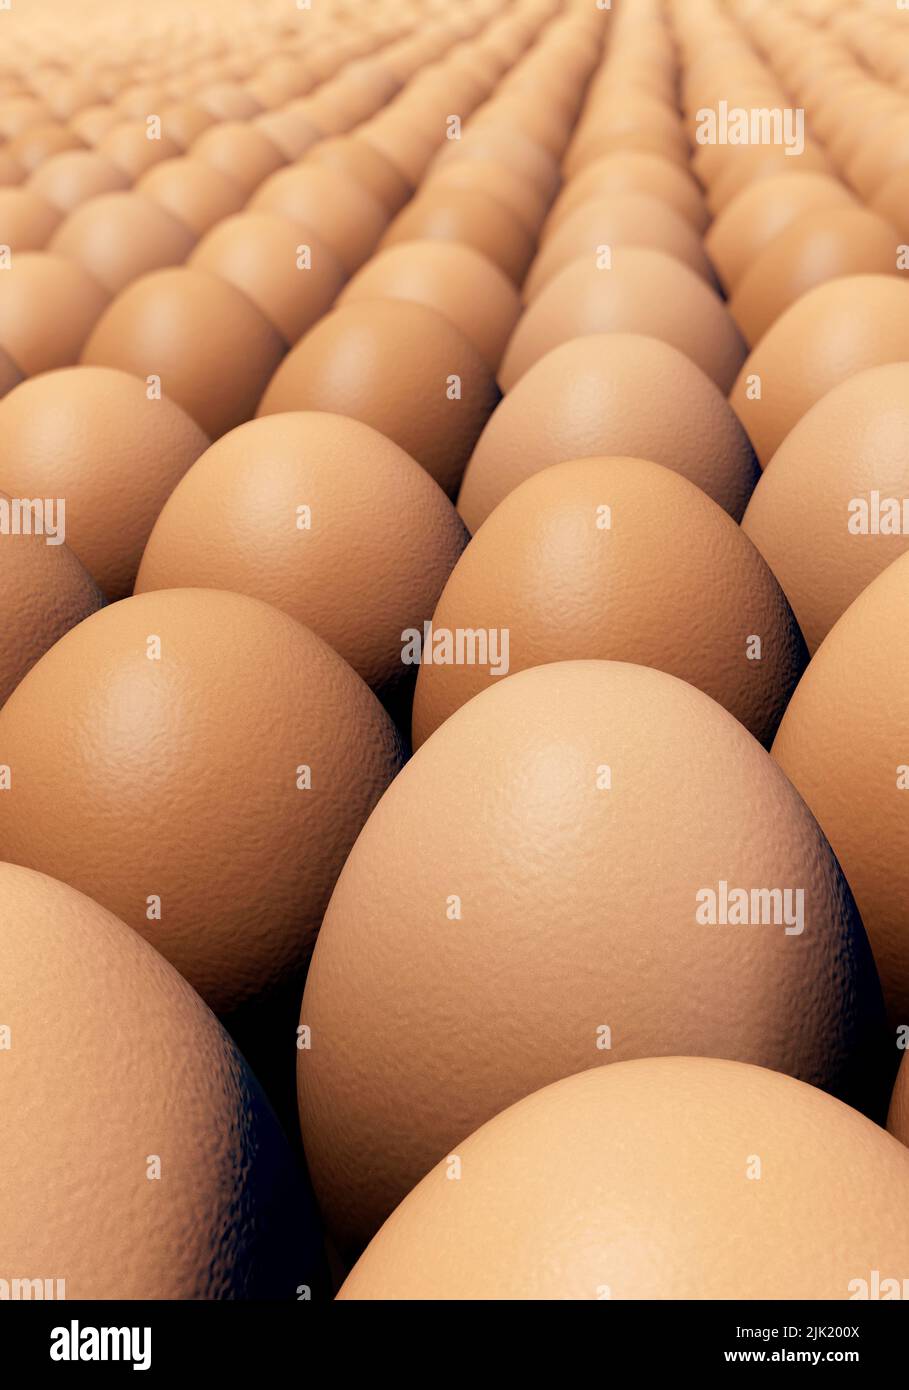 Lots of brown chicken eggs in paortrait format Stock Photo